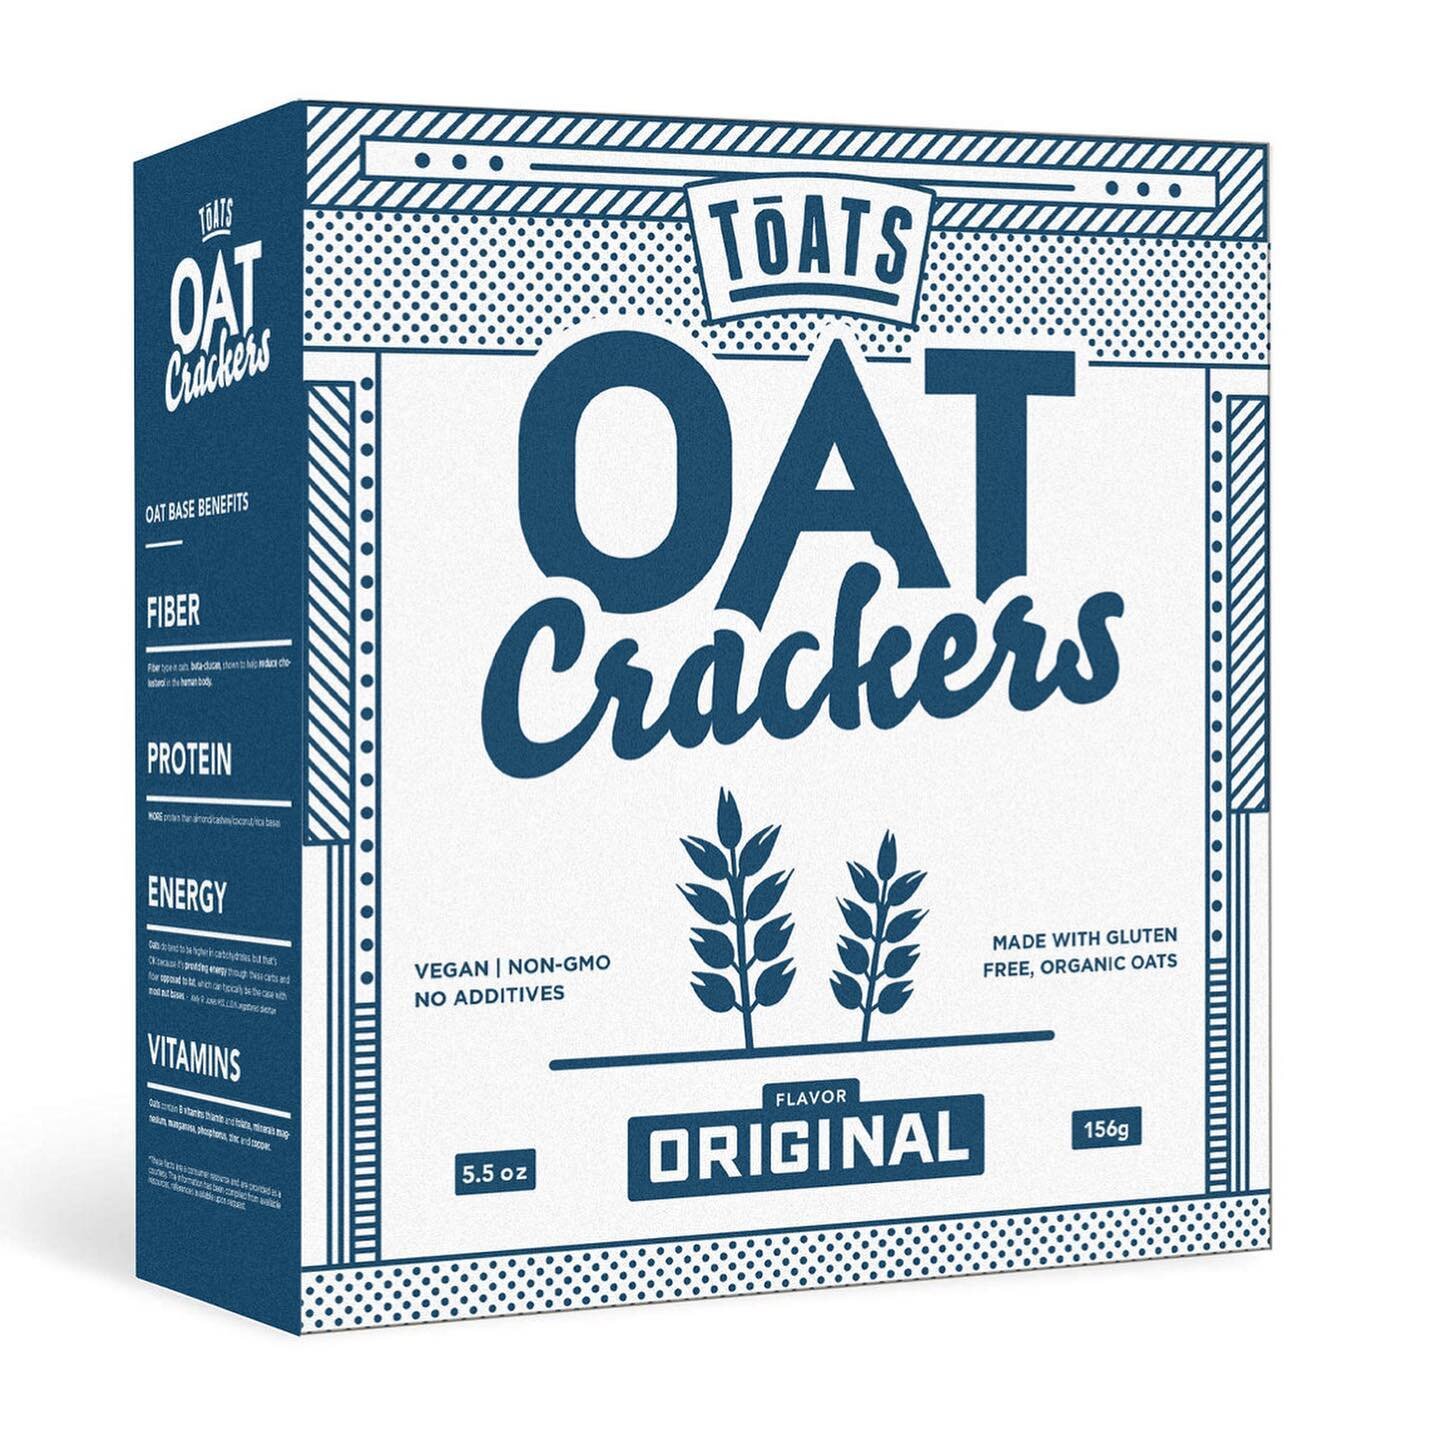 Our oat crackers are here. They are vegan, non-gmo and made made with #glutenfree organic oats grown in sunny Colorado. Visit our website (link in bio) to order.